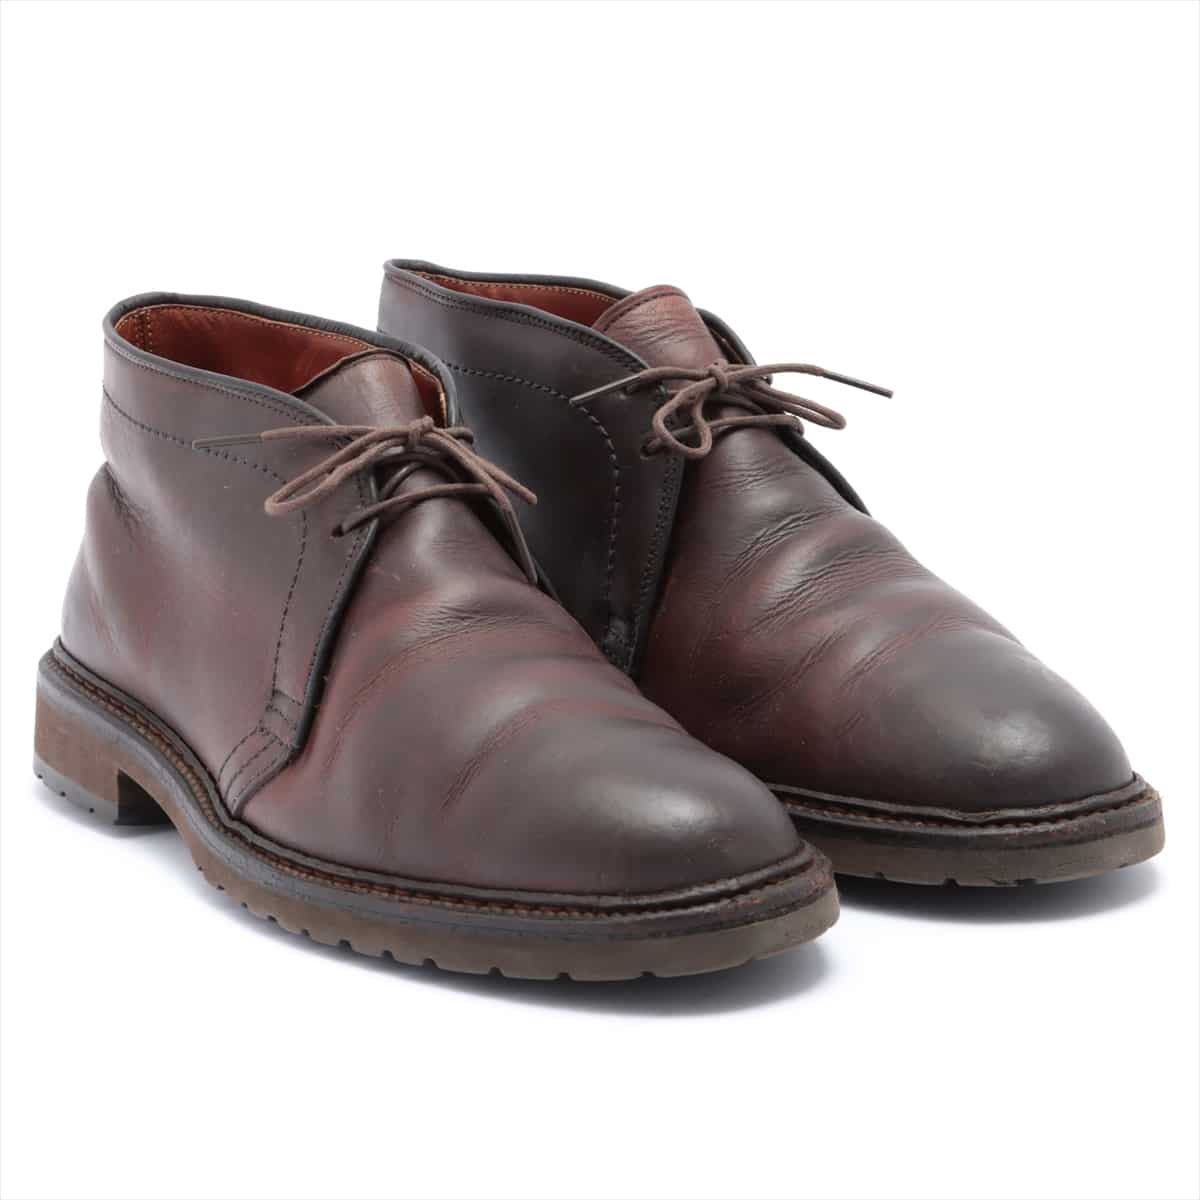 Alden Leather Chukka Boots 9 Men's Brown There is stickiness